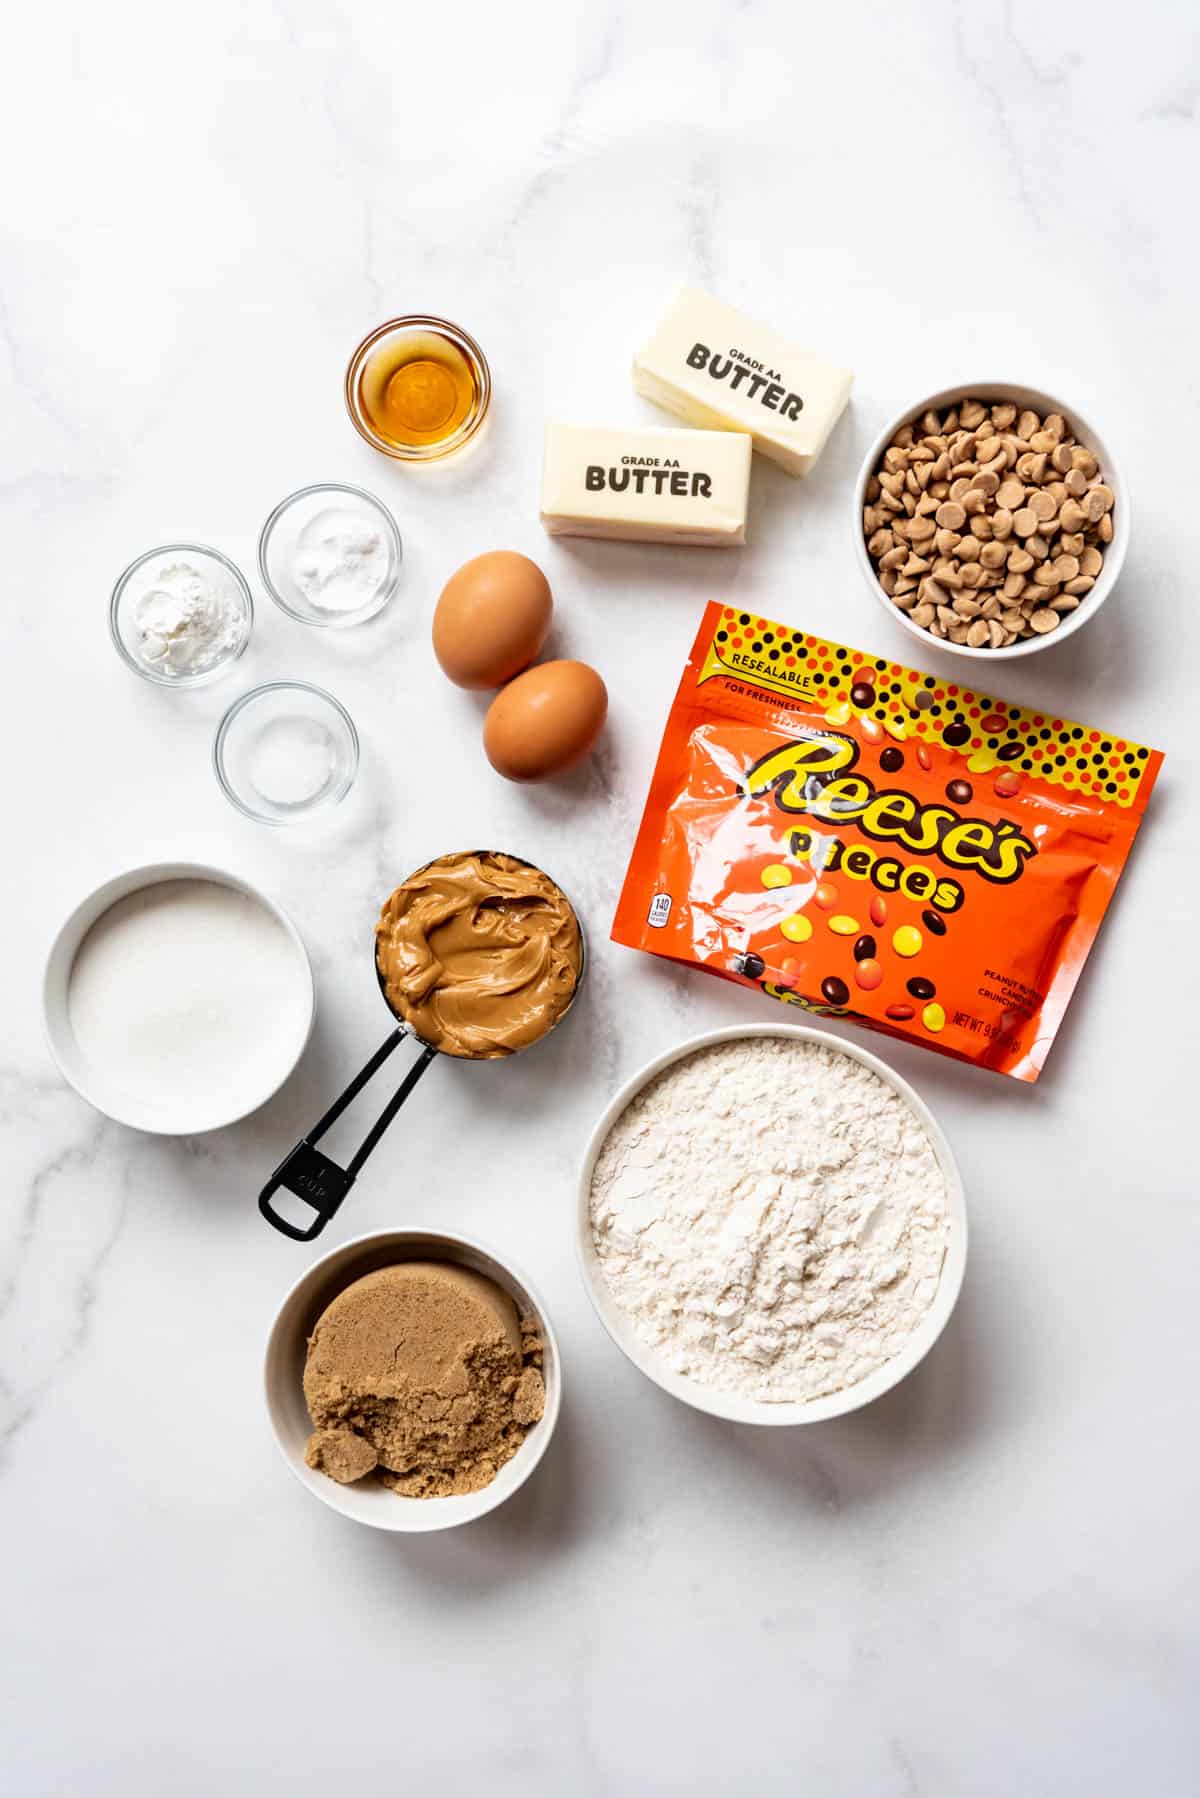 Ingredients for Reese's Pieces Cookies.